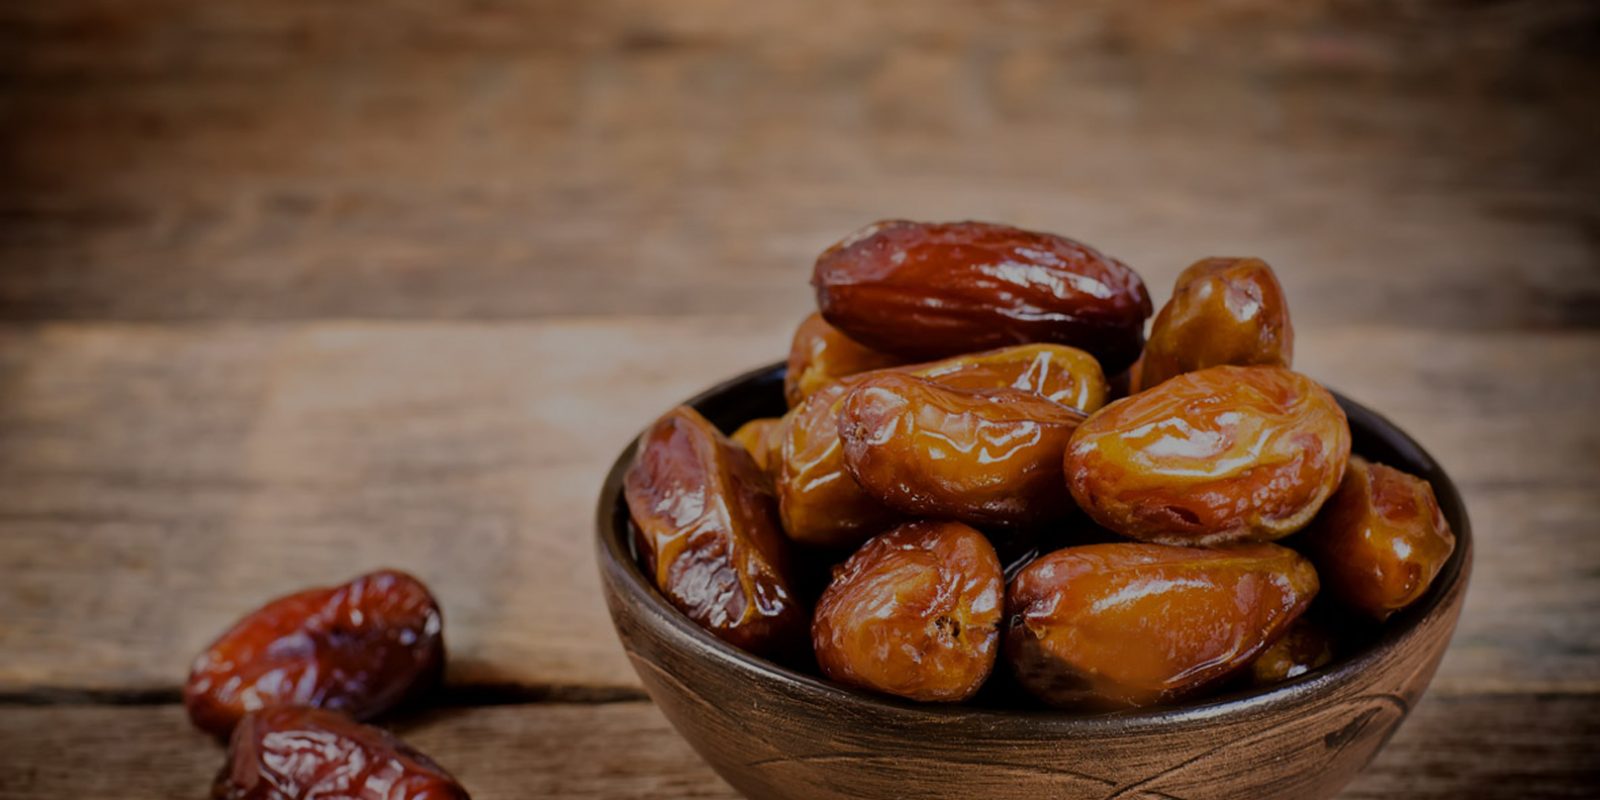 WE PROVIDE HIGHEST DATES QUALITY